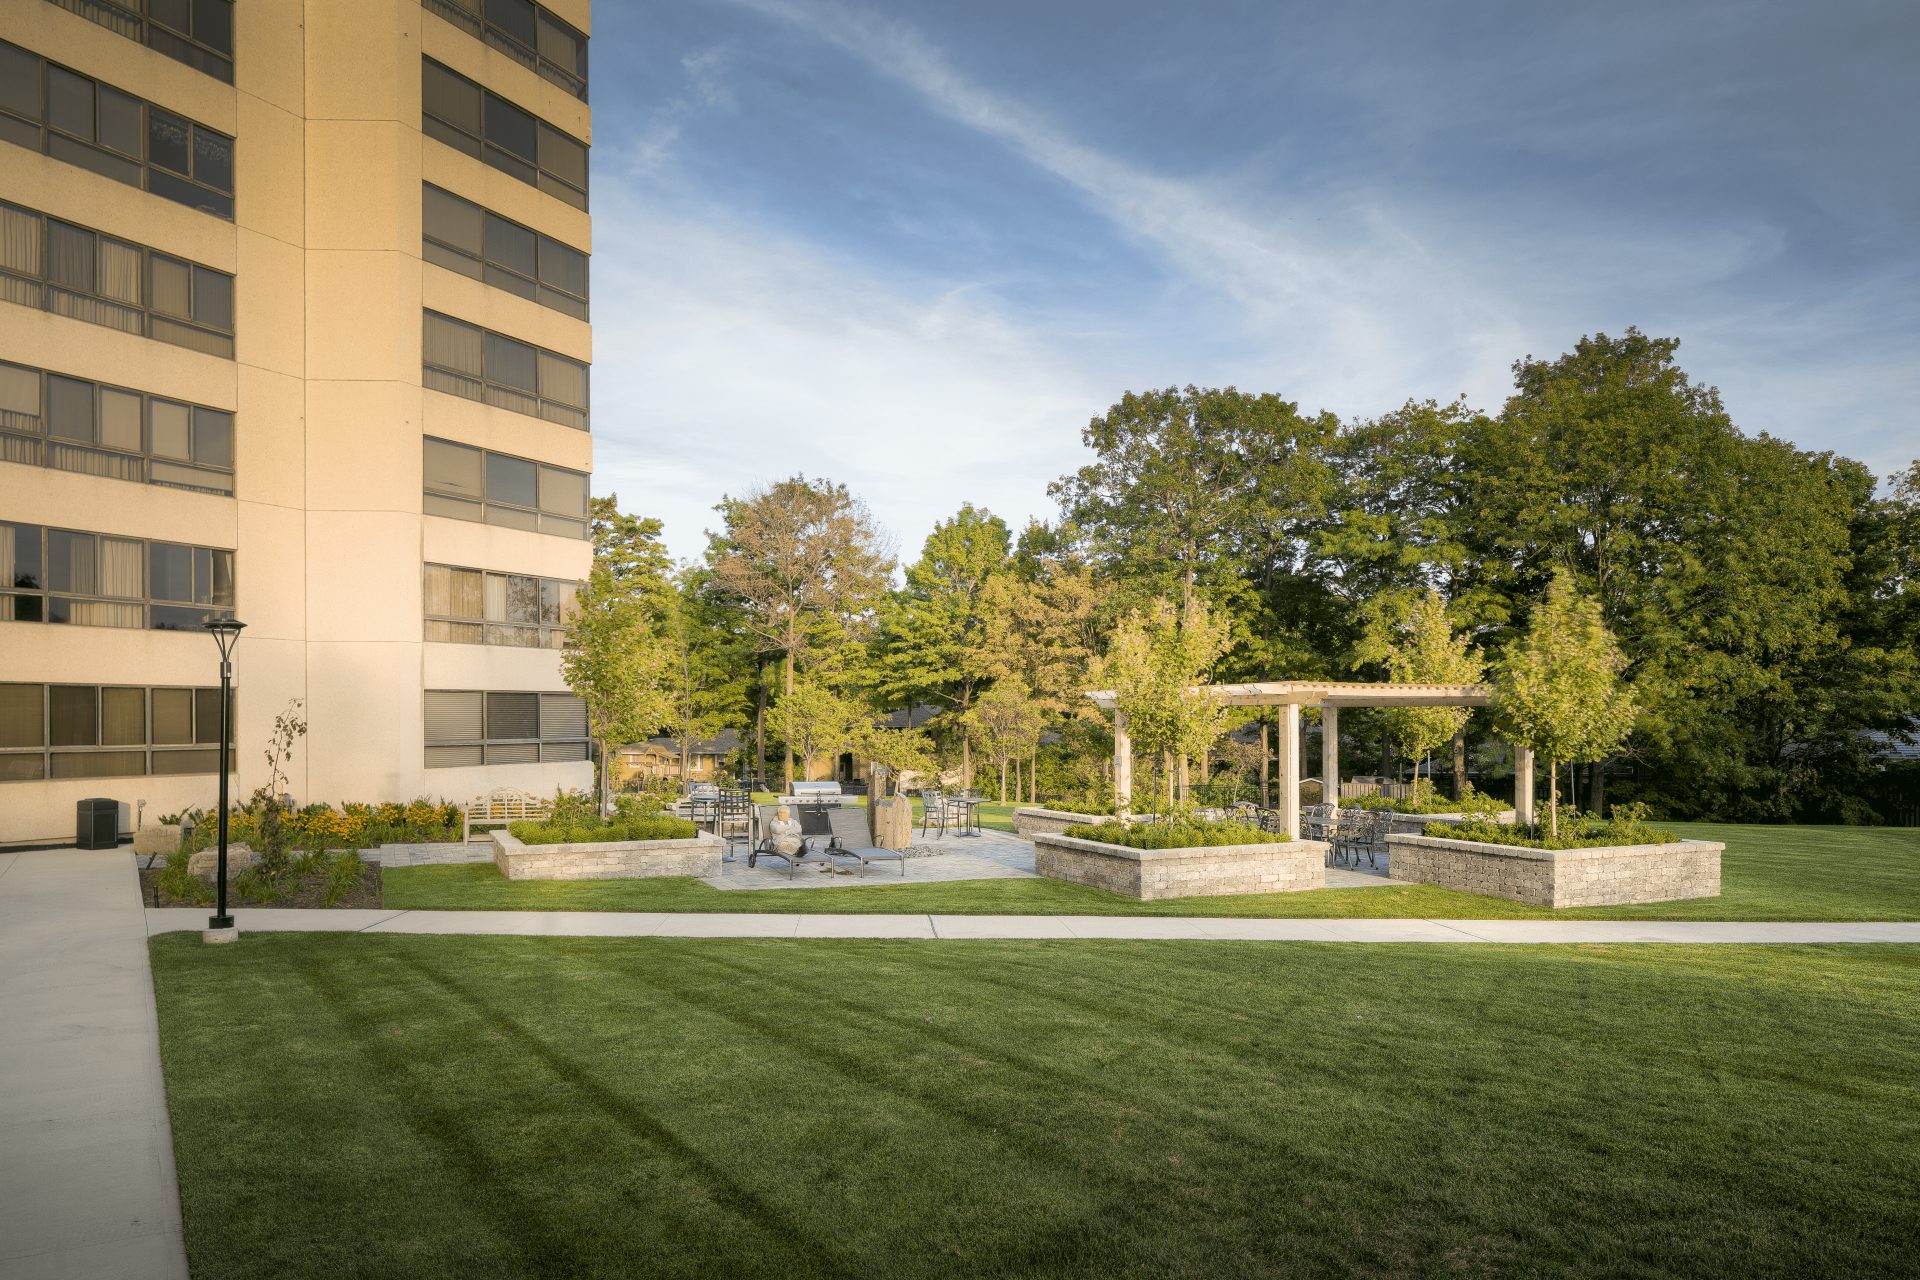 An outdoor leisure area near a condo building with retaining wall gardens and freshly mowed grass.